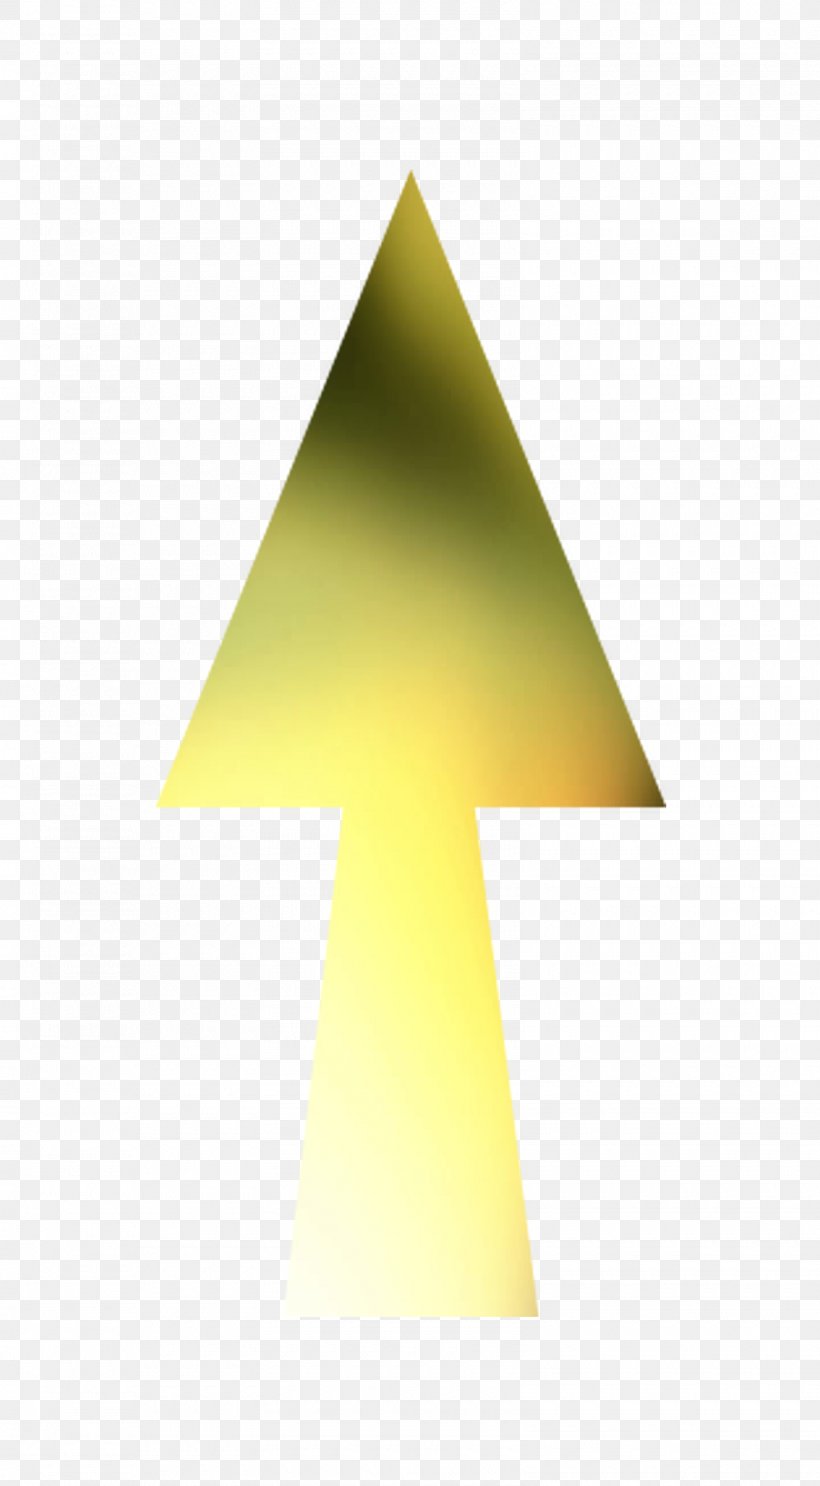 Triangle Product Design Symbol, PNG, 1600x2900px, Triangle, Green, Symbol, Tree, Yellow Download Free